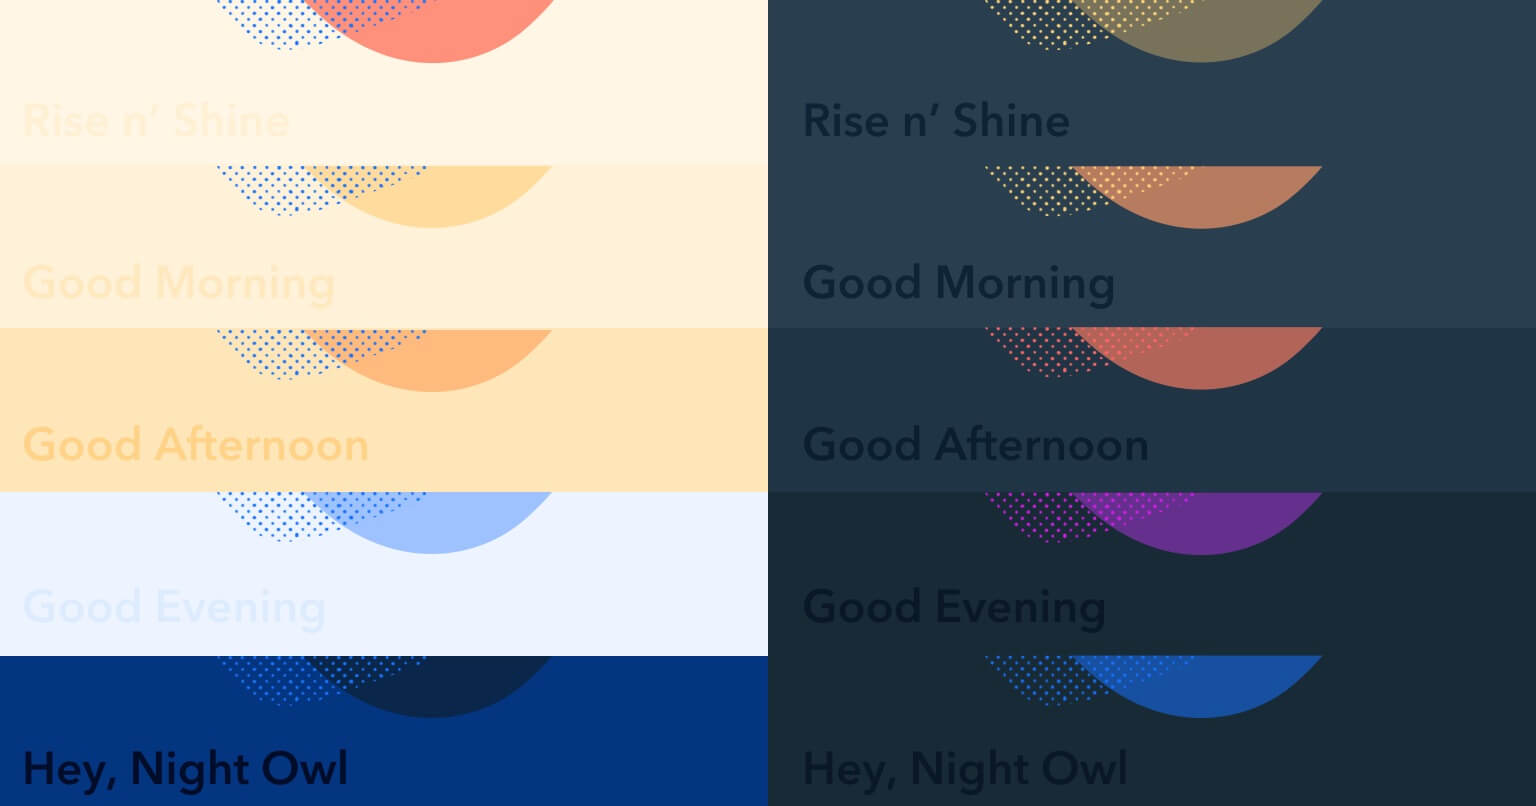 Home page banner colors and greetings shift by time of day.